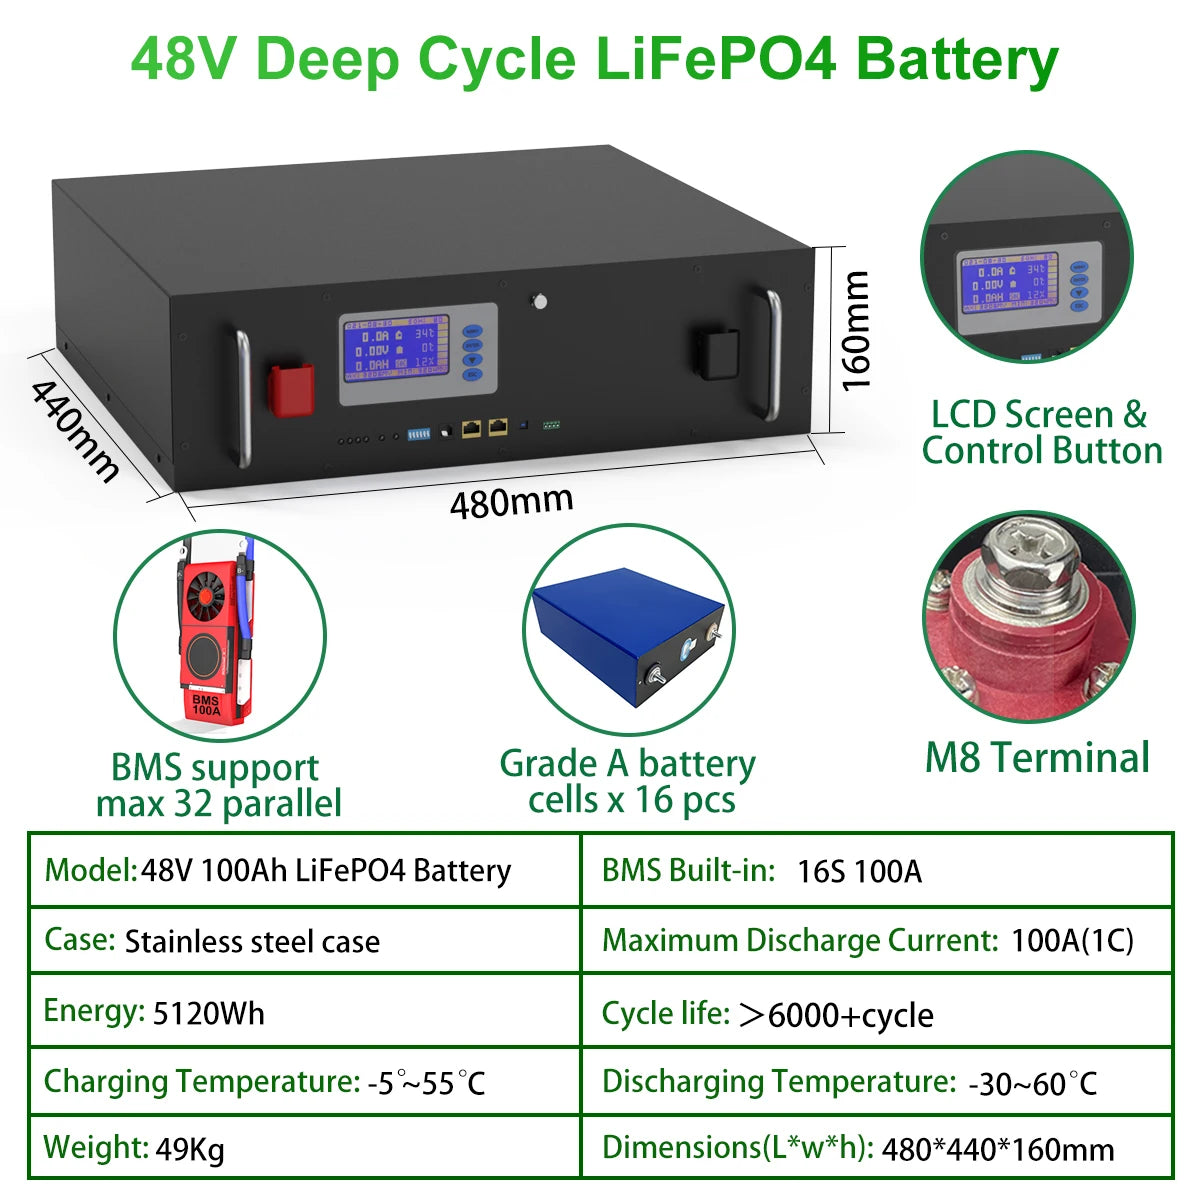 Deep Cycle LiFePO4 Battery with built-in BMS, LCD screen, and stainless steel case.